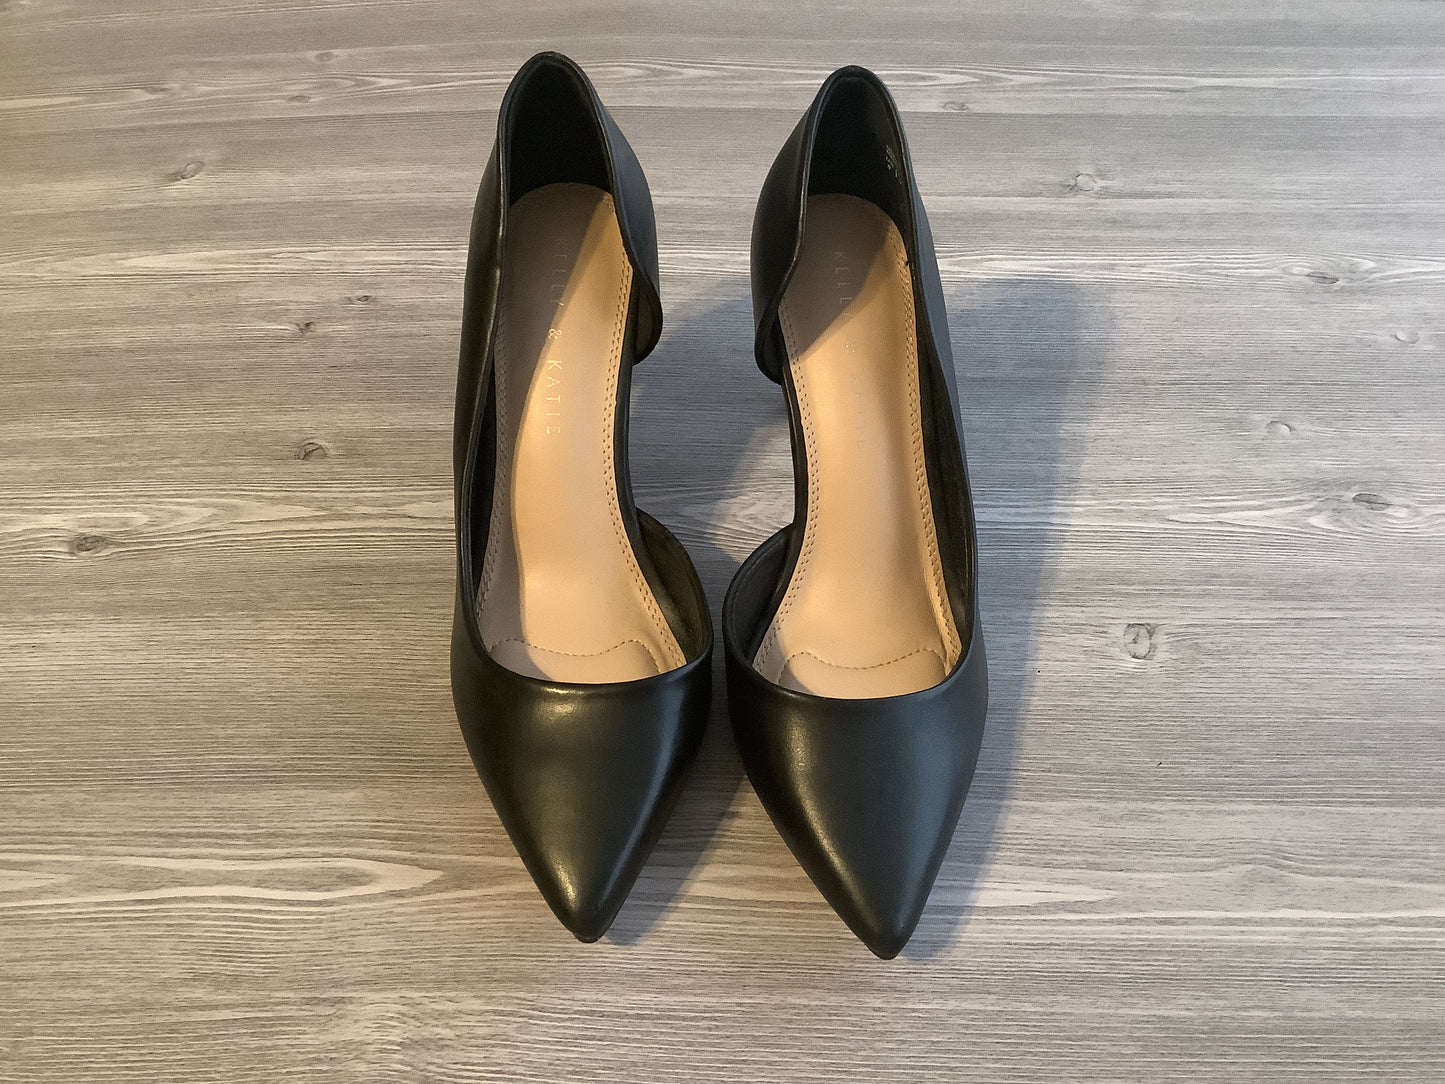 Black Shoes Heels Stiletto Kelly And Katie, Size 8